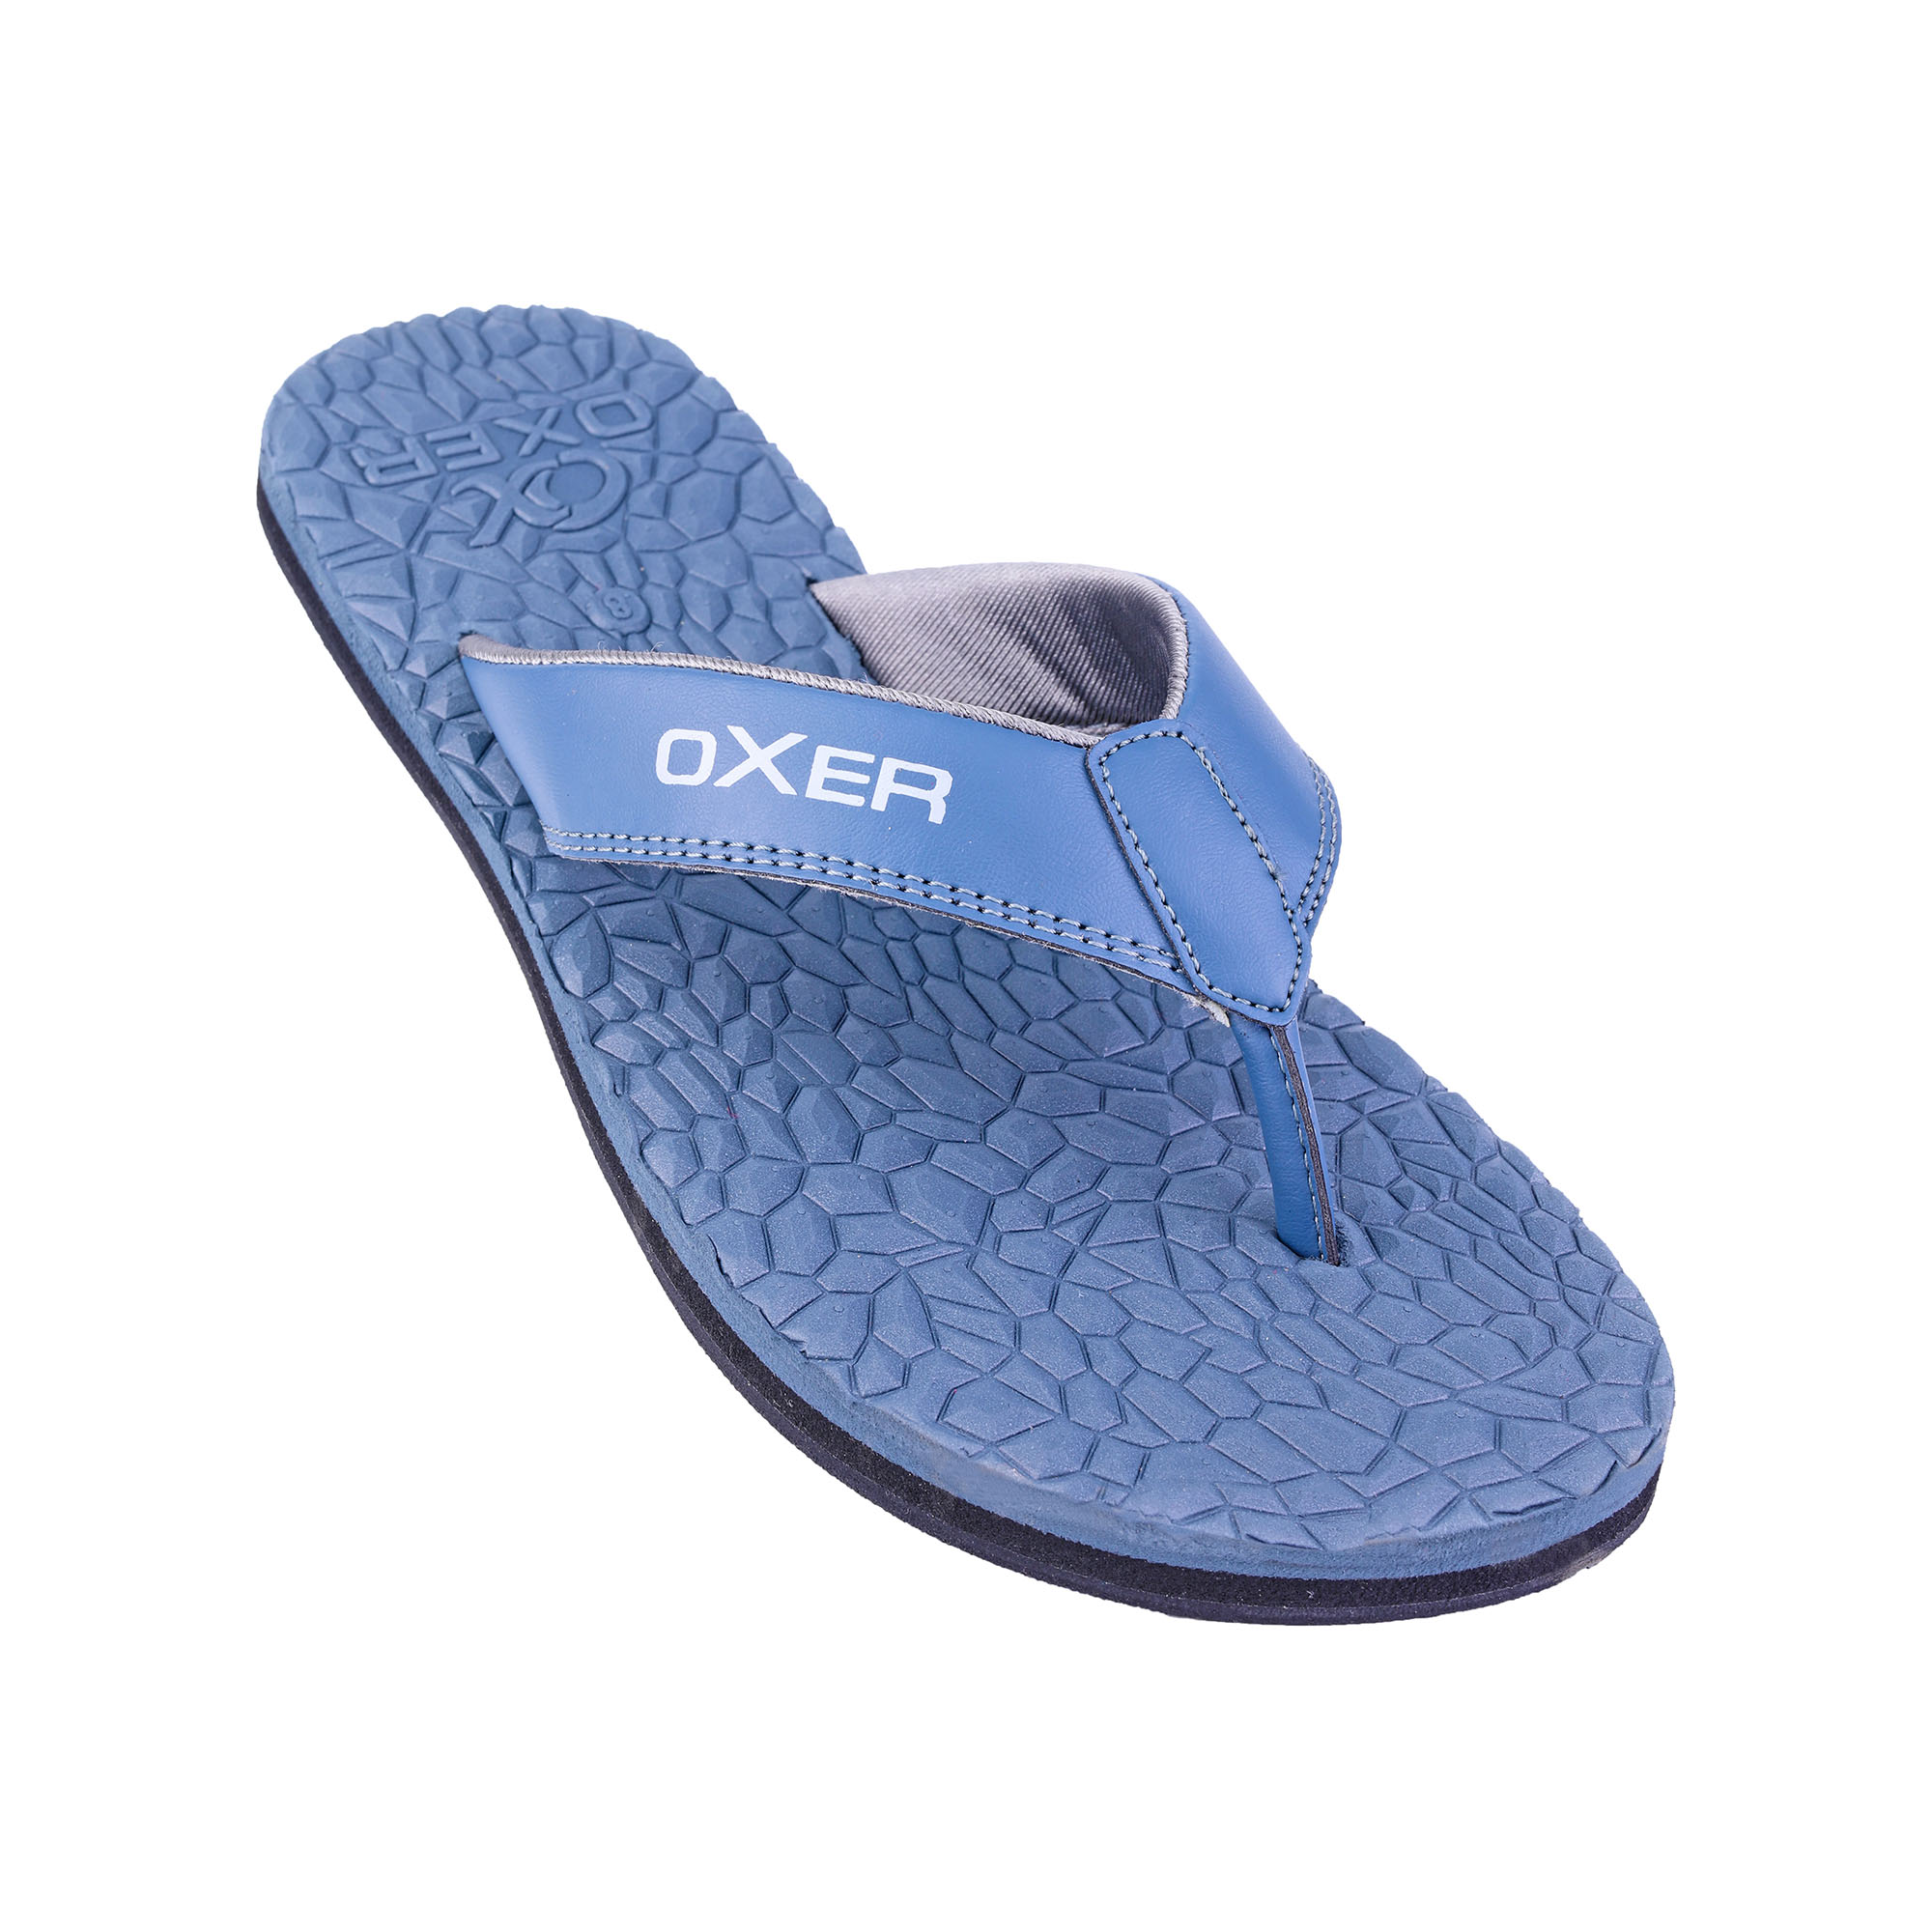 Buy OX OXER Flip Flops Casual Slippers for Mens Style: RR-603-White, Size:  10 at Amazon.in